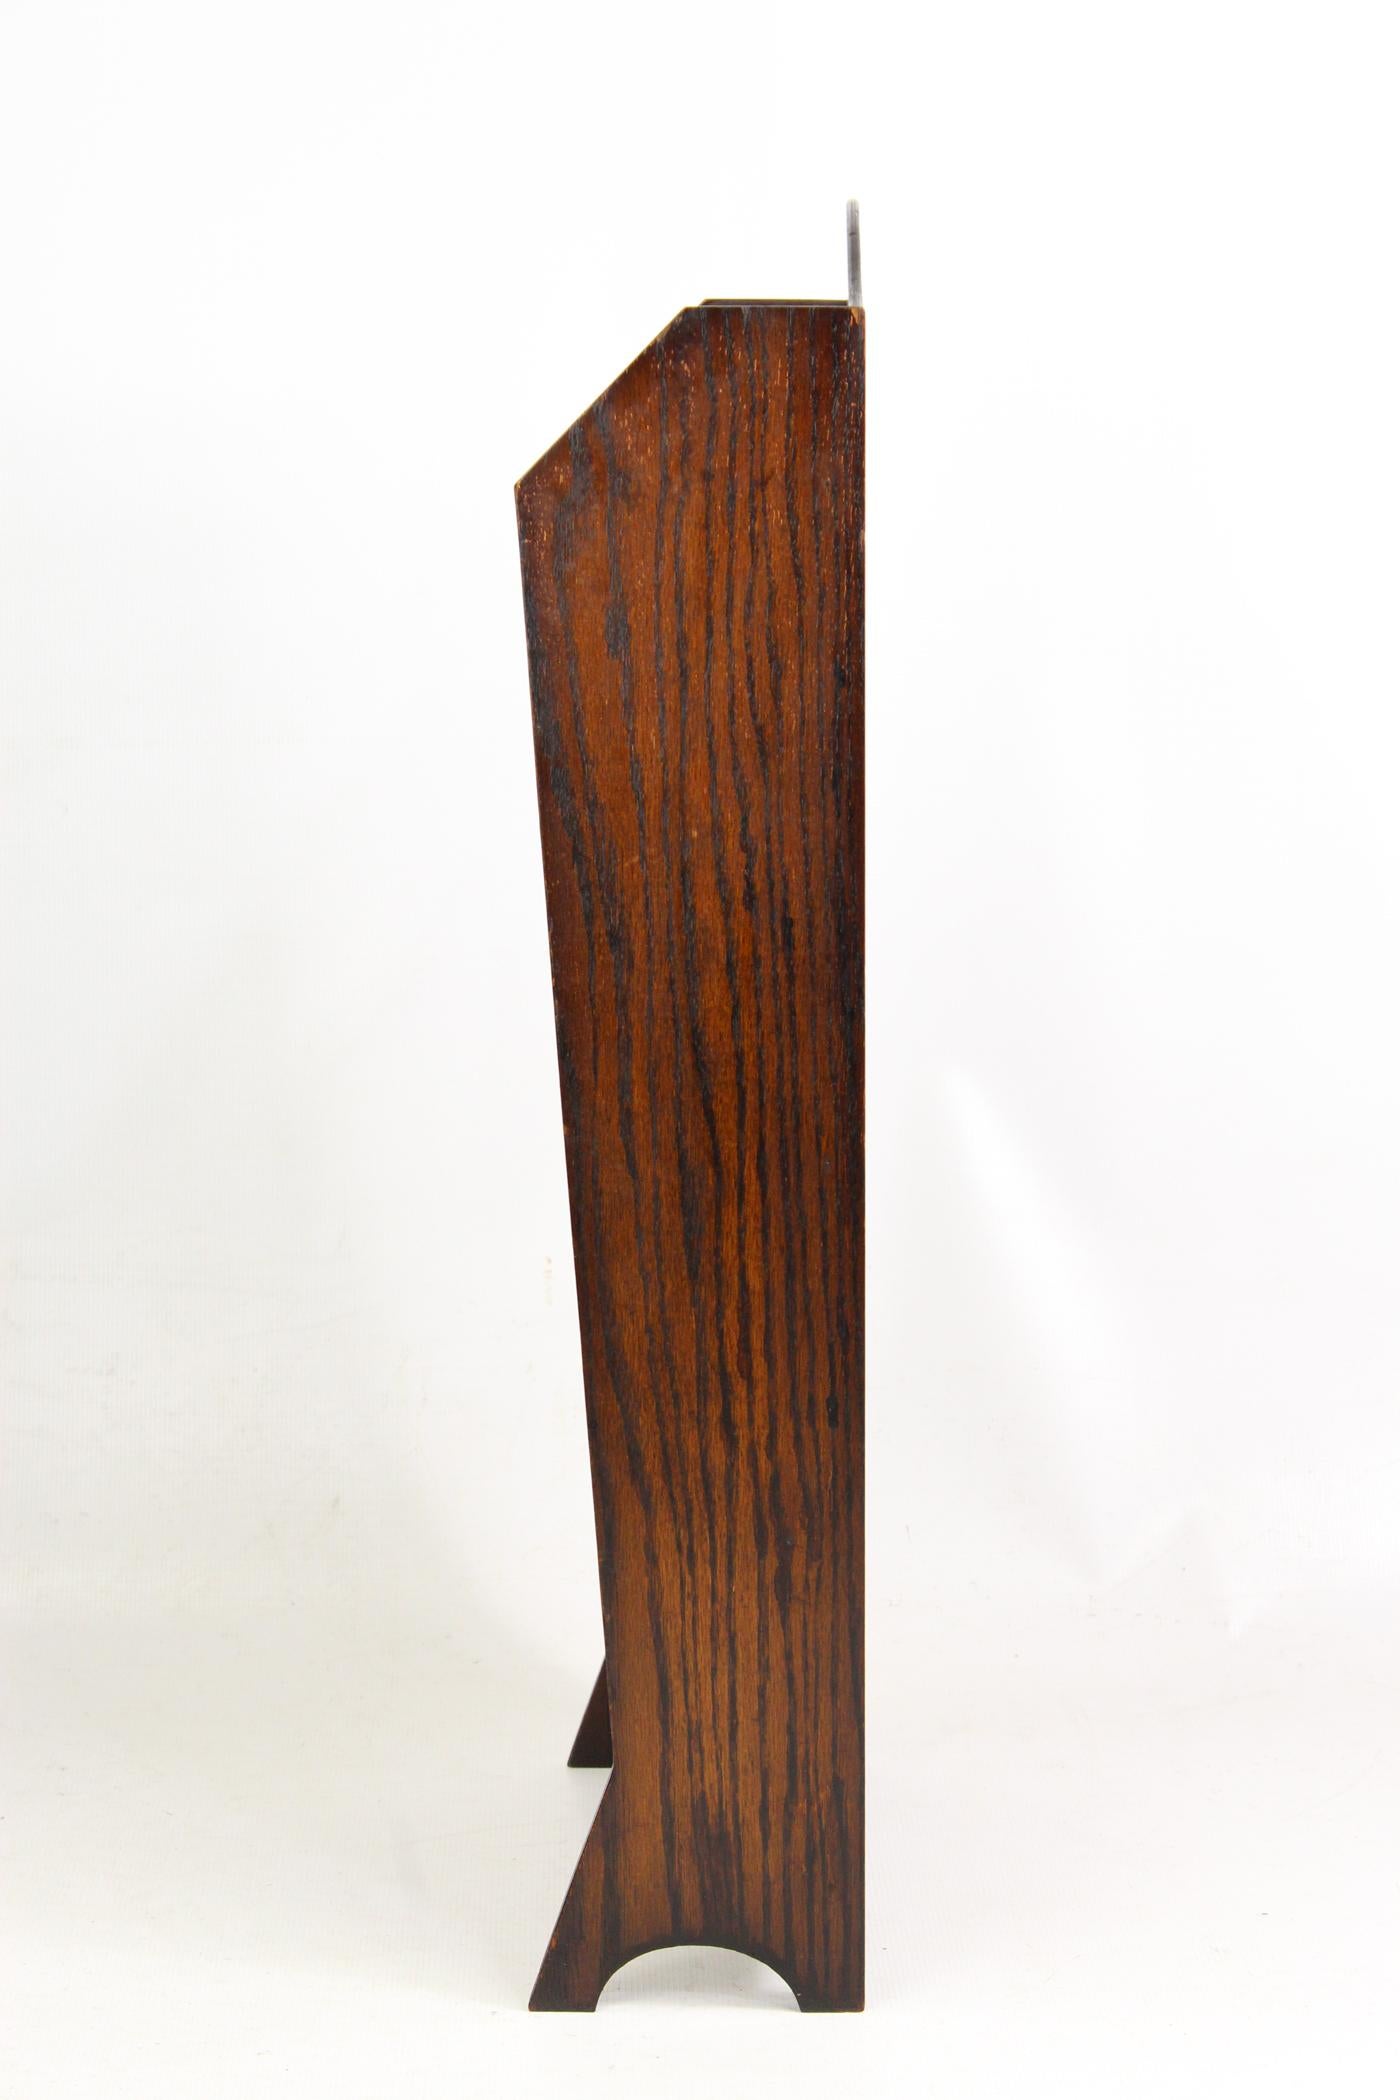 Early 20th Century Art Deco Oak Newspaper Stand Magazine Stand English, circa 1920s For Sale